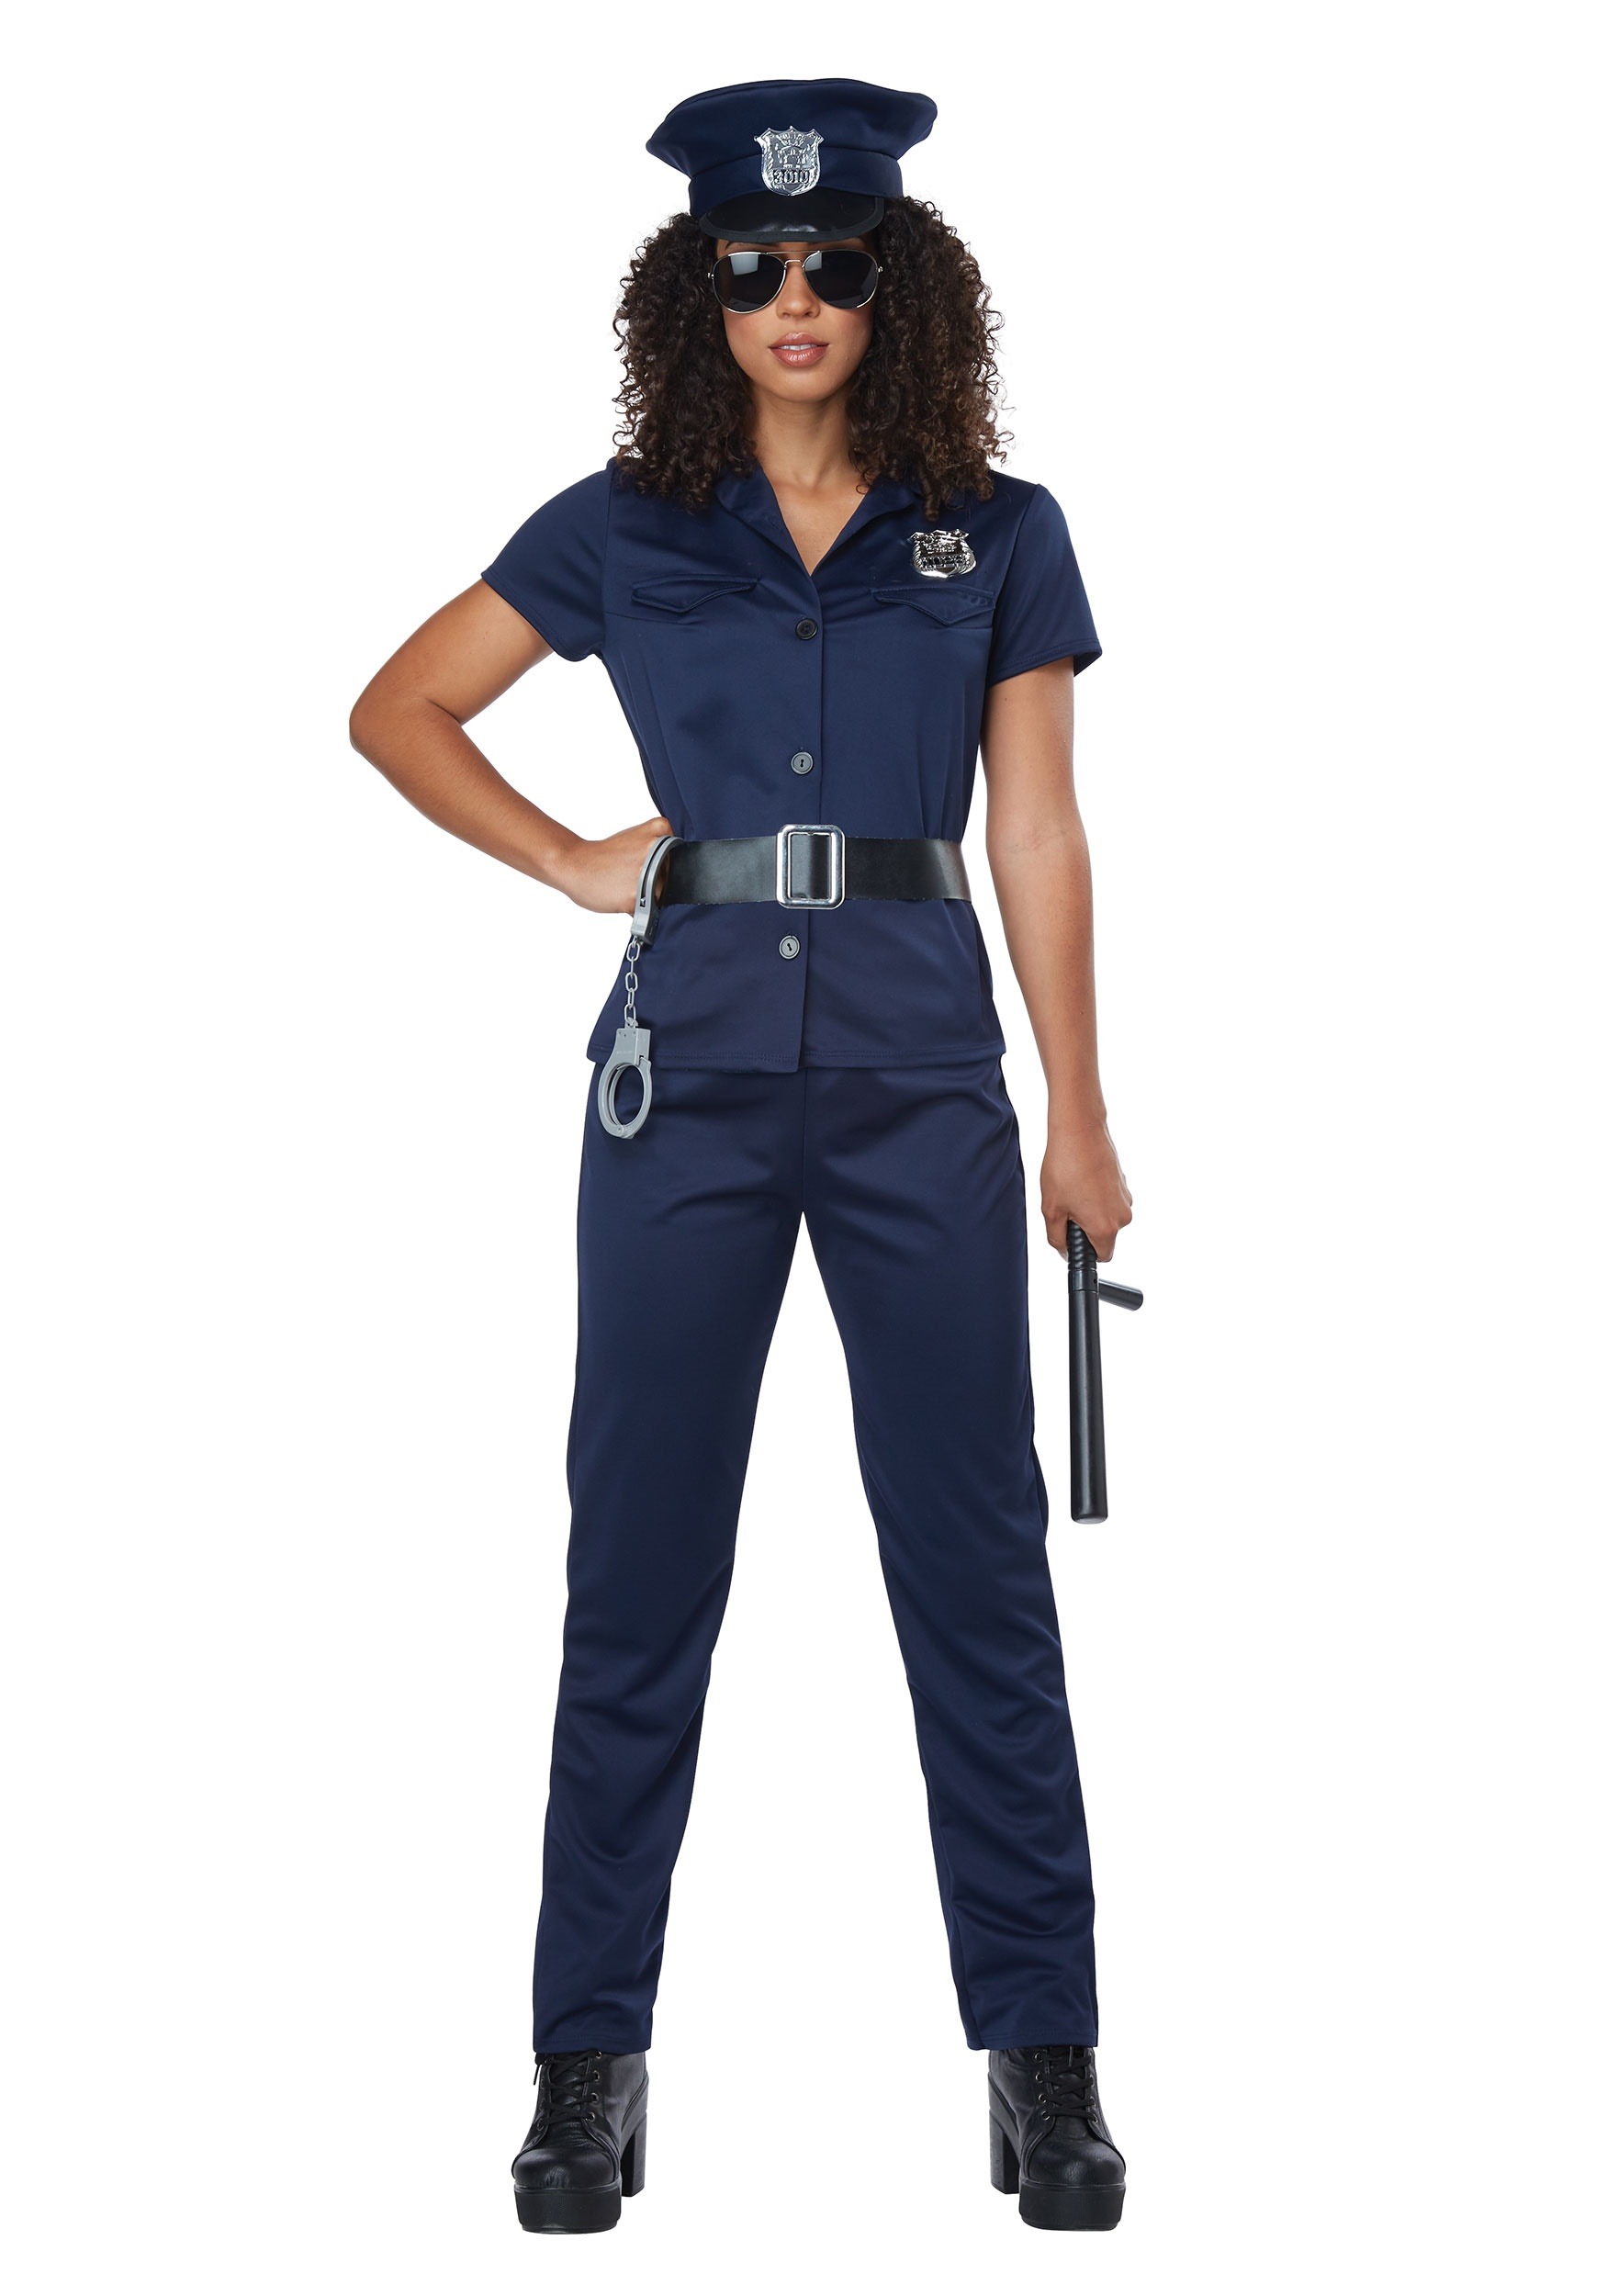 Photos - Fancy Dress California Costume Collection Police Officer Women's Costume Black/Blu 